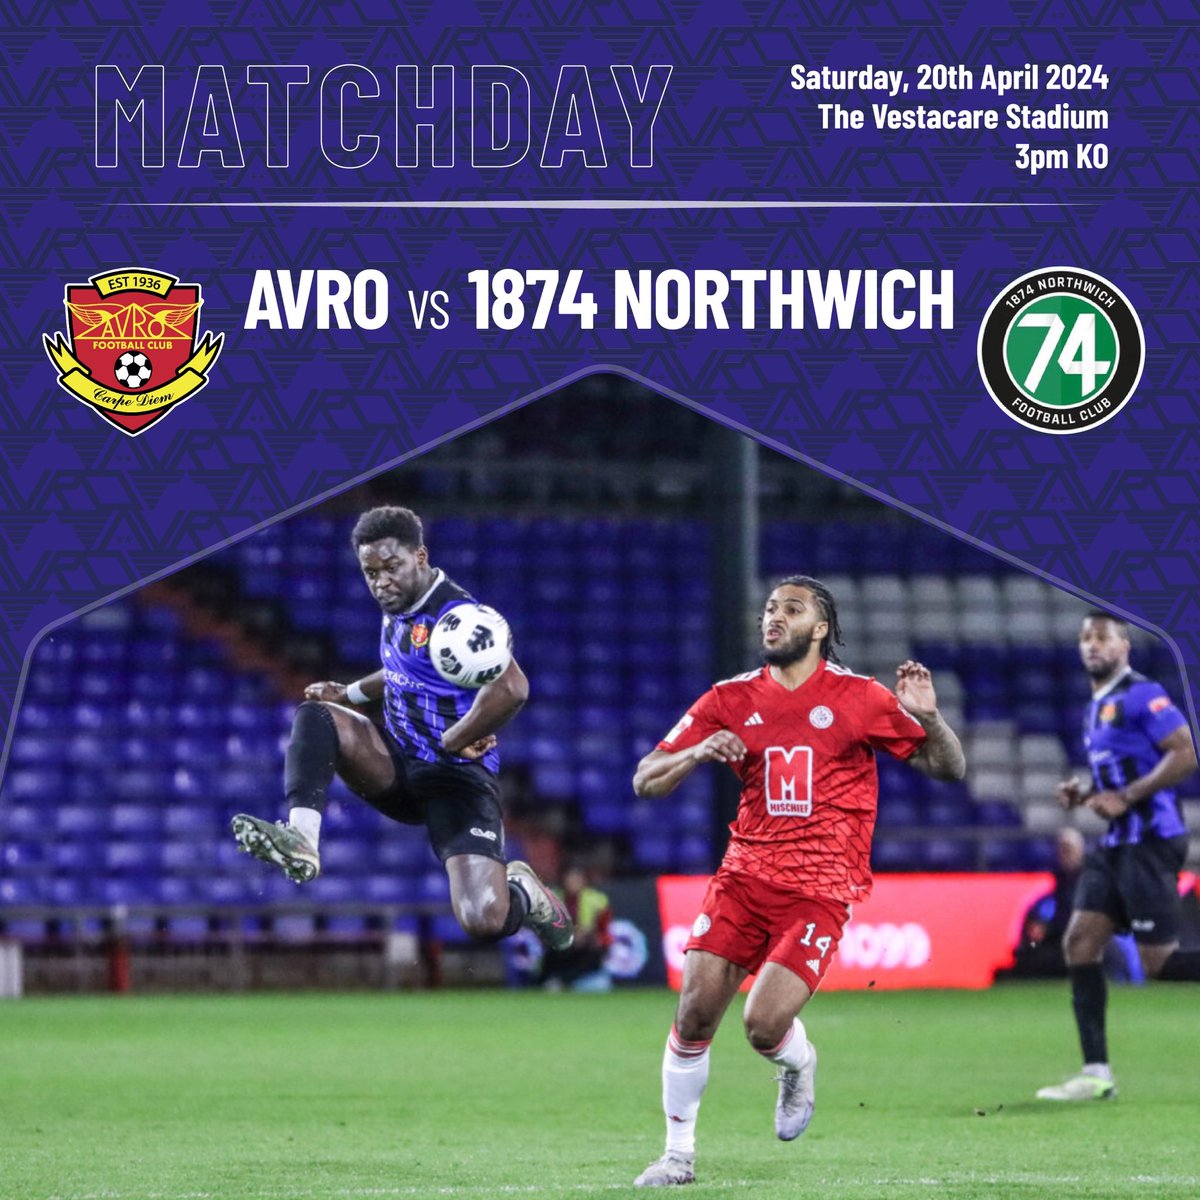 It’s matchday for the final time at home this season. Let’s give Frosty and Edgy the send off they deserve. A reminder, admission is £5 for all and £1 for all u16. Come on Avro 💙